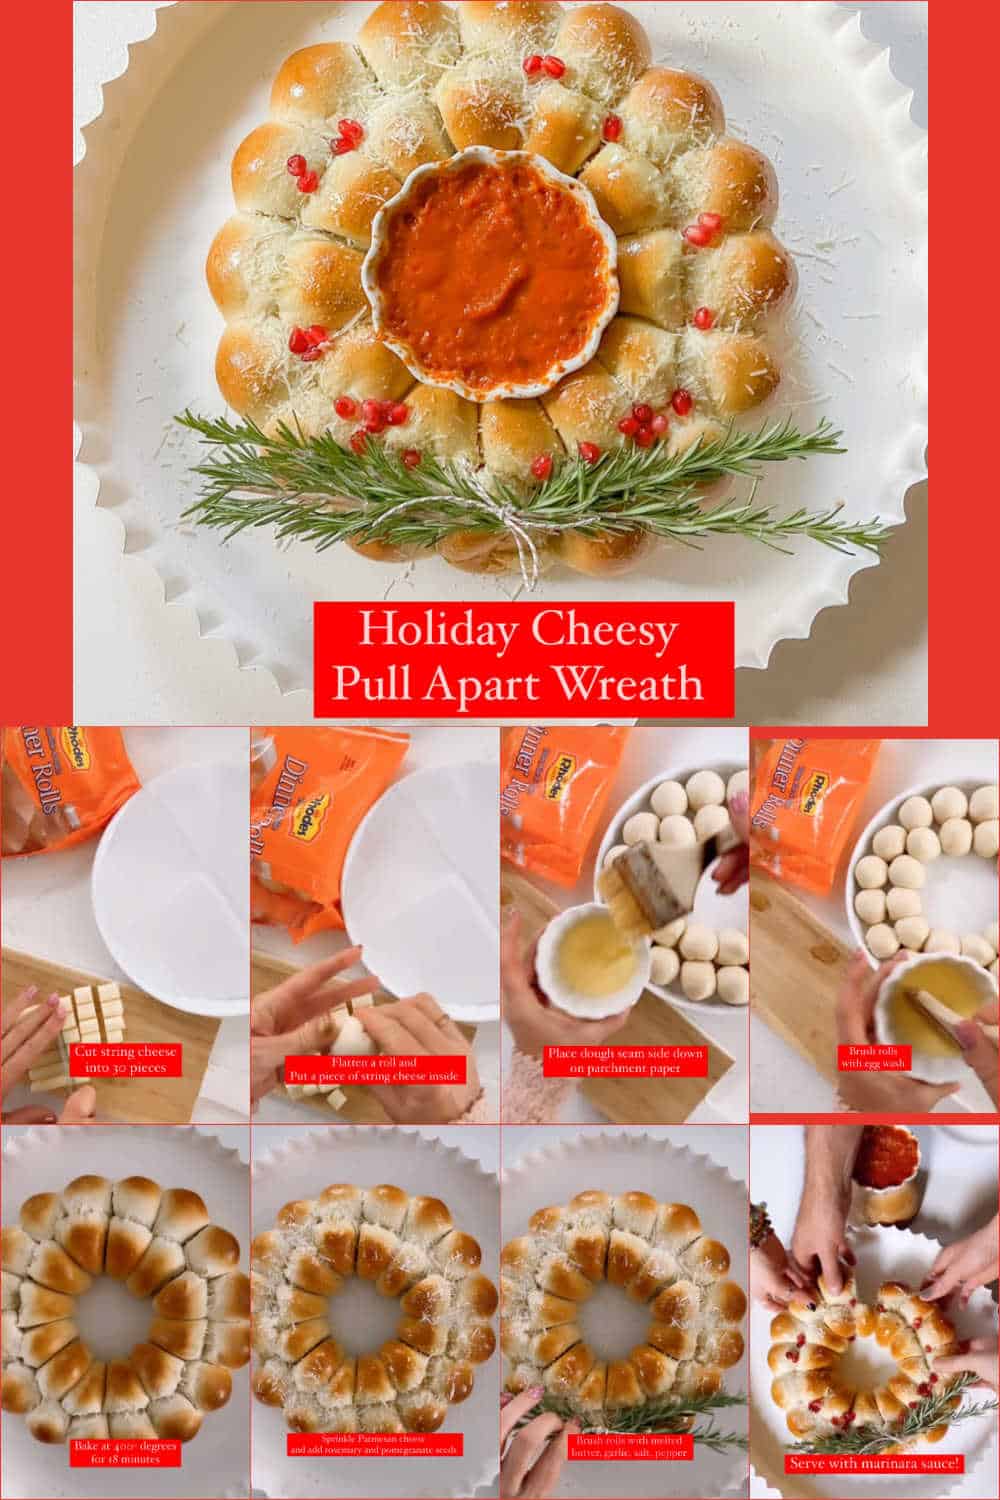 Holiday Cheesy Pull-Apart Bread Wreath. Golden rolls with a cheesy filling a perfect appetizer for holiday parties or for a night at home.